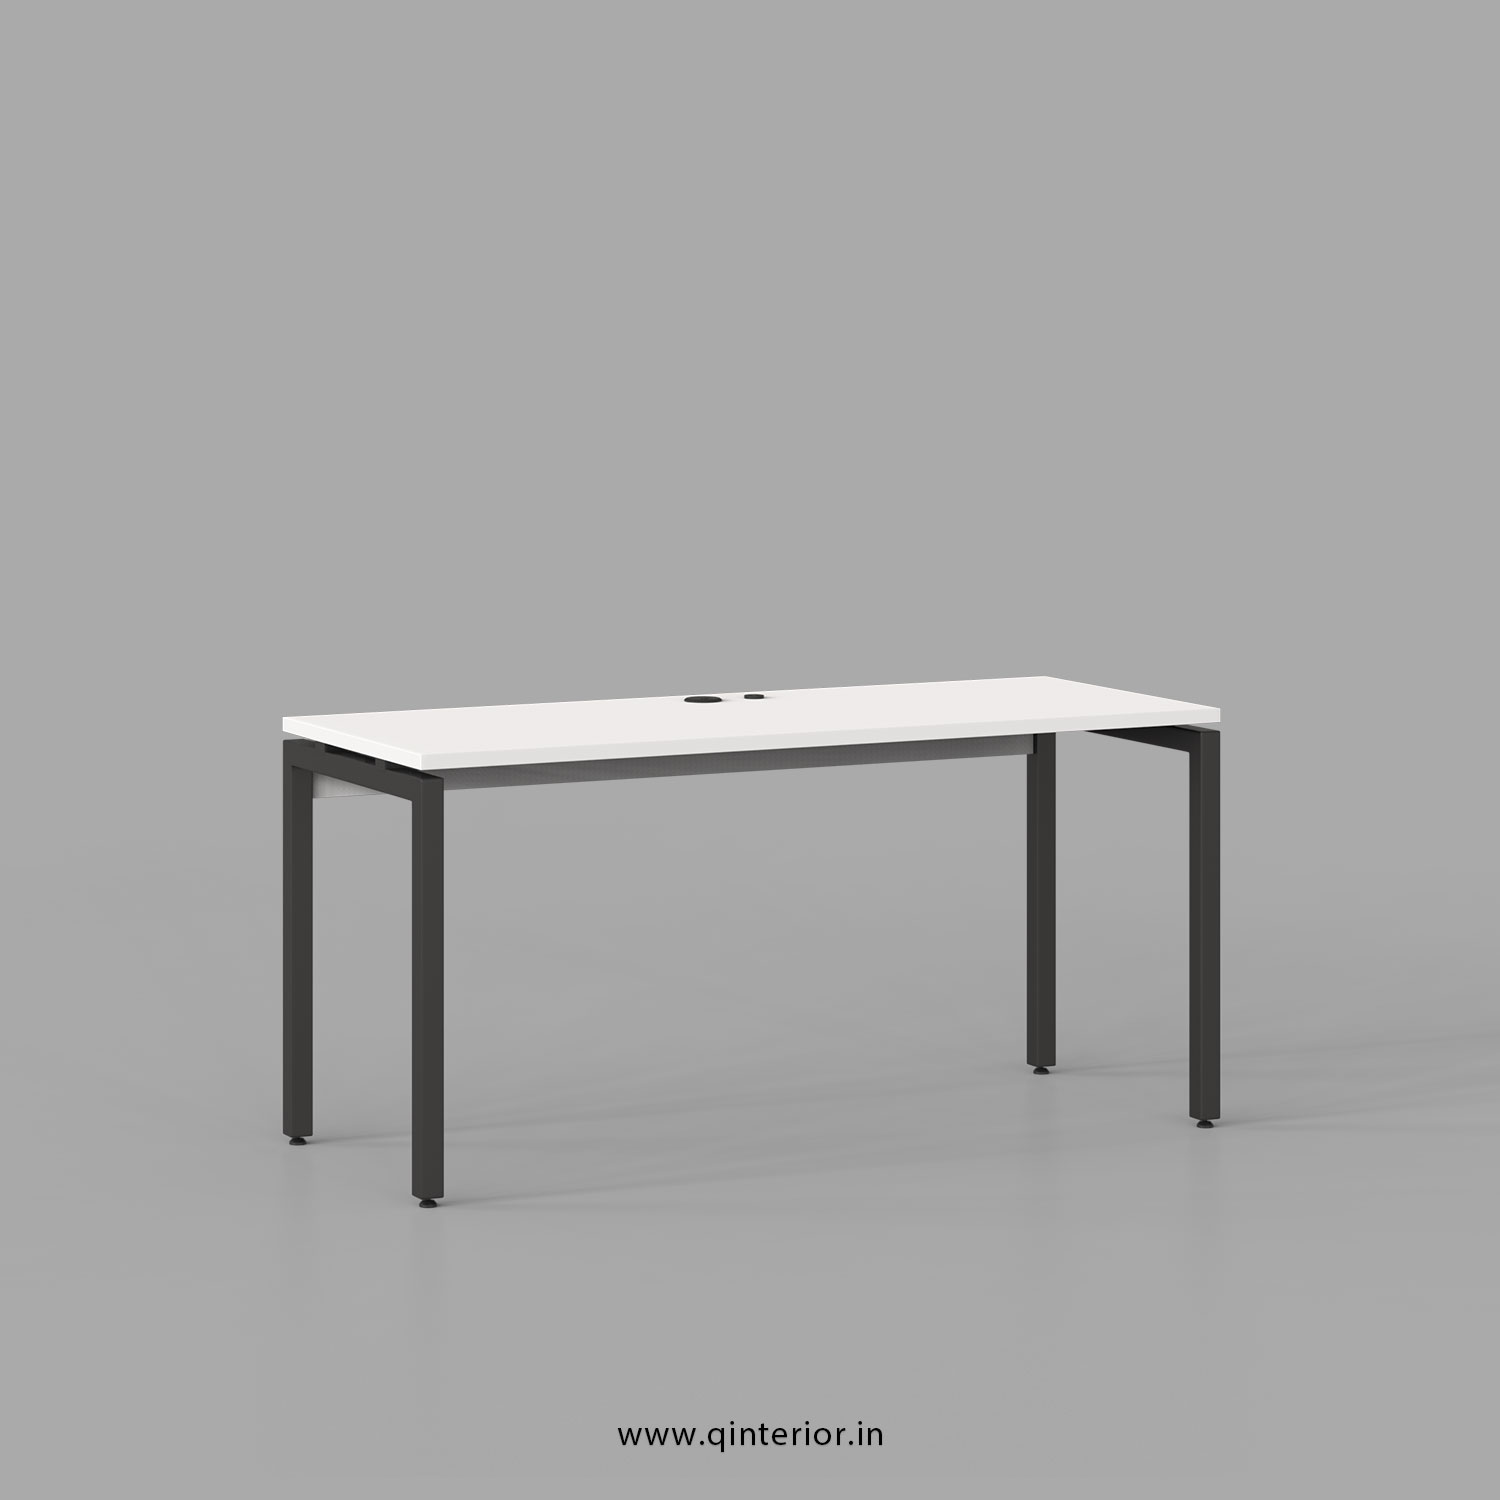 Montel Work Station in White Finish - OWS001 C4